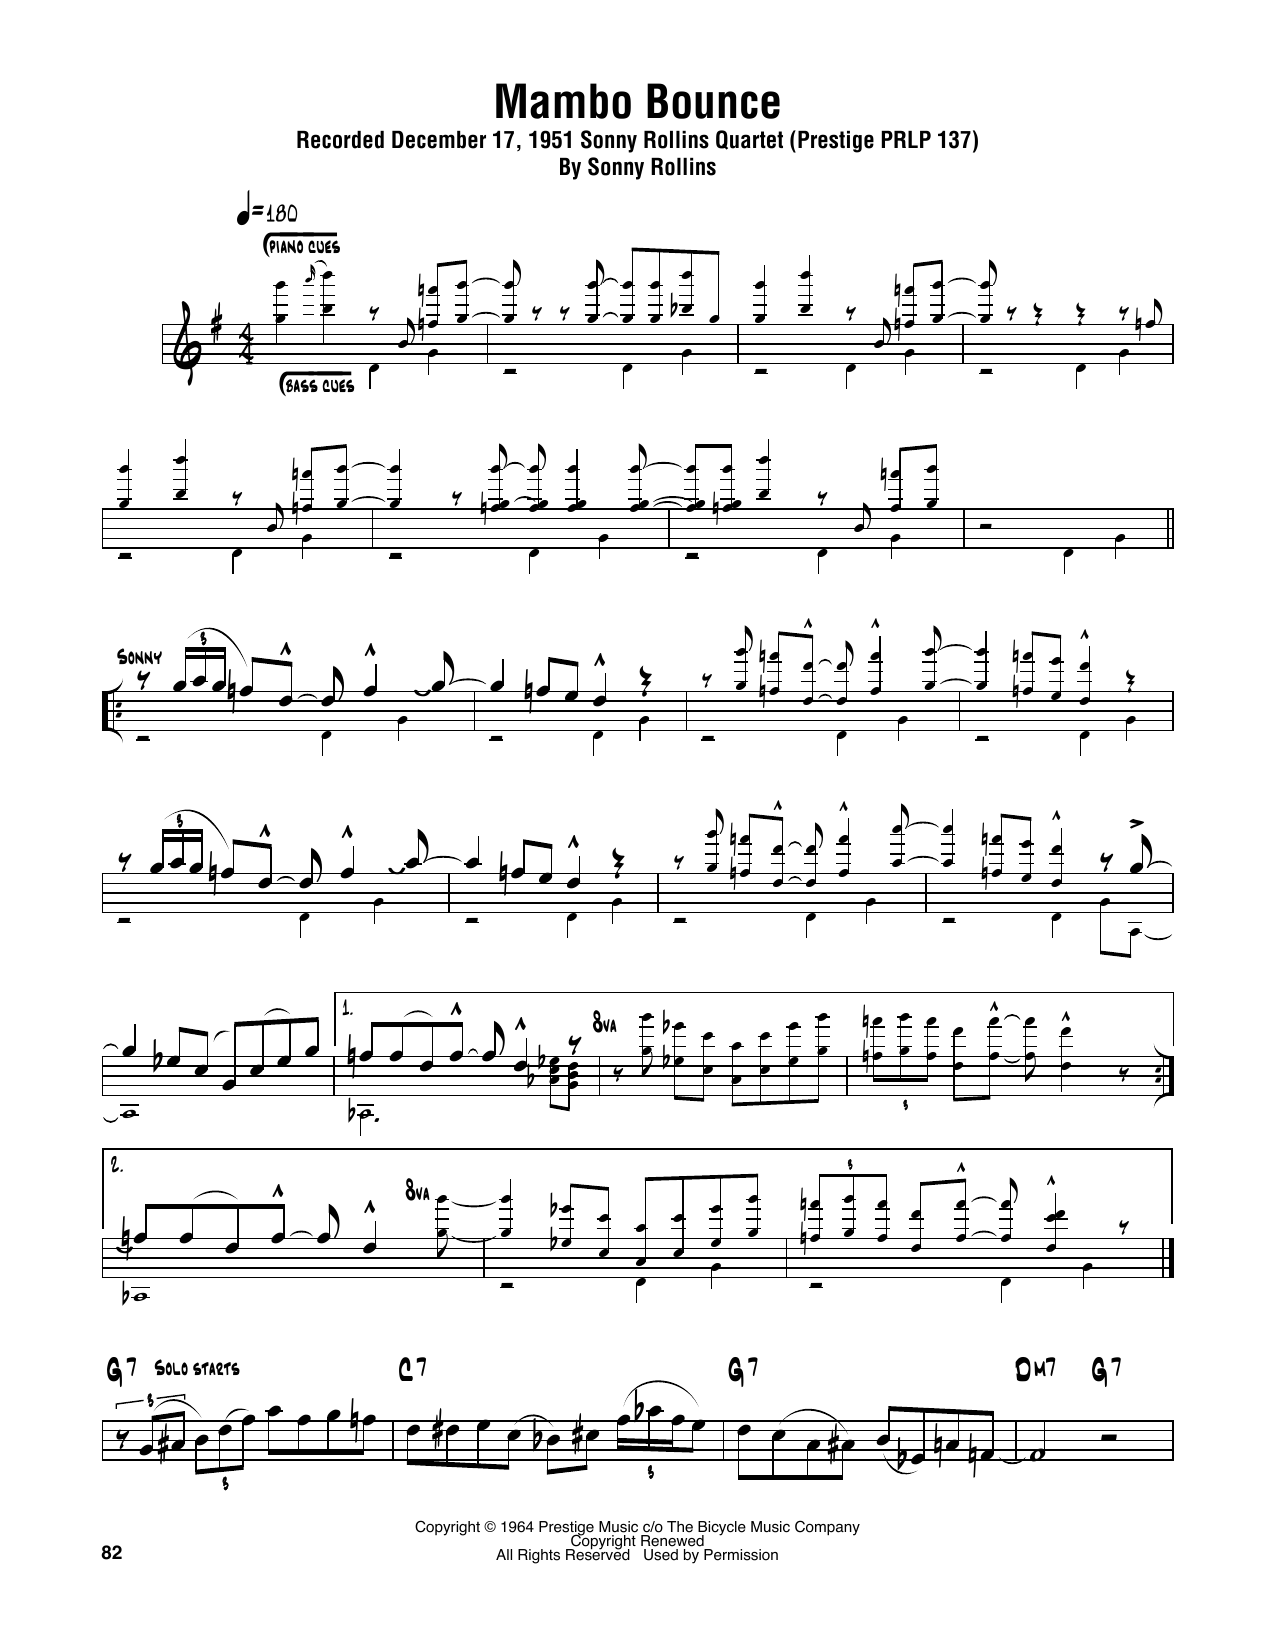 Download Sonny Rollins Mambo Bounce Sheet Music